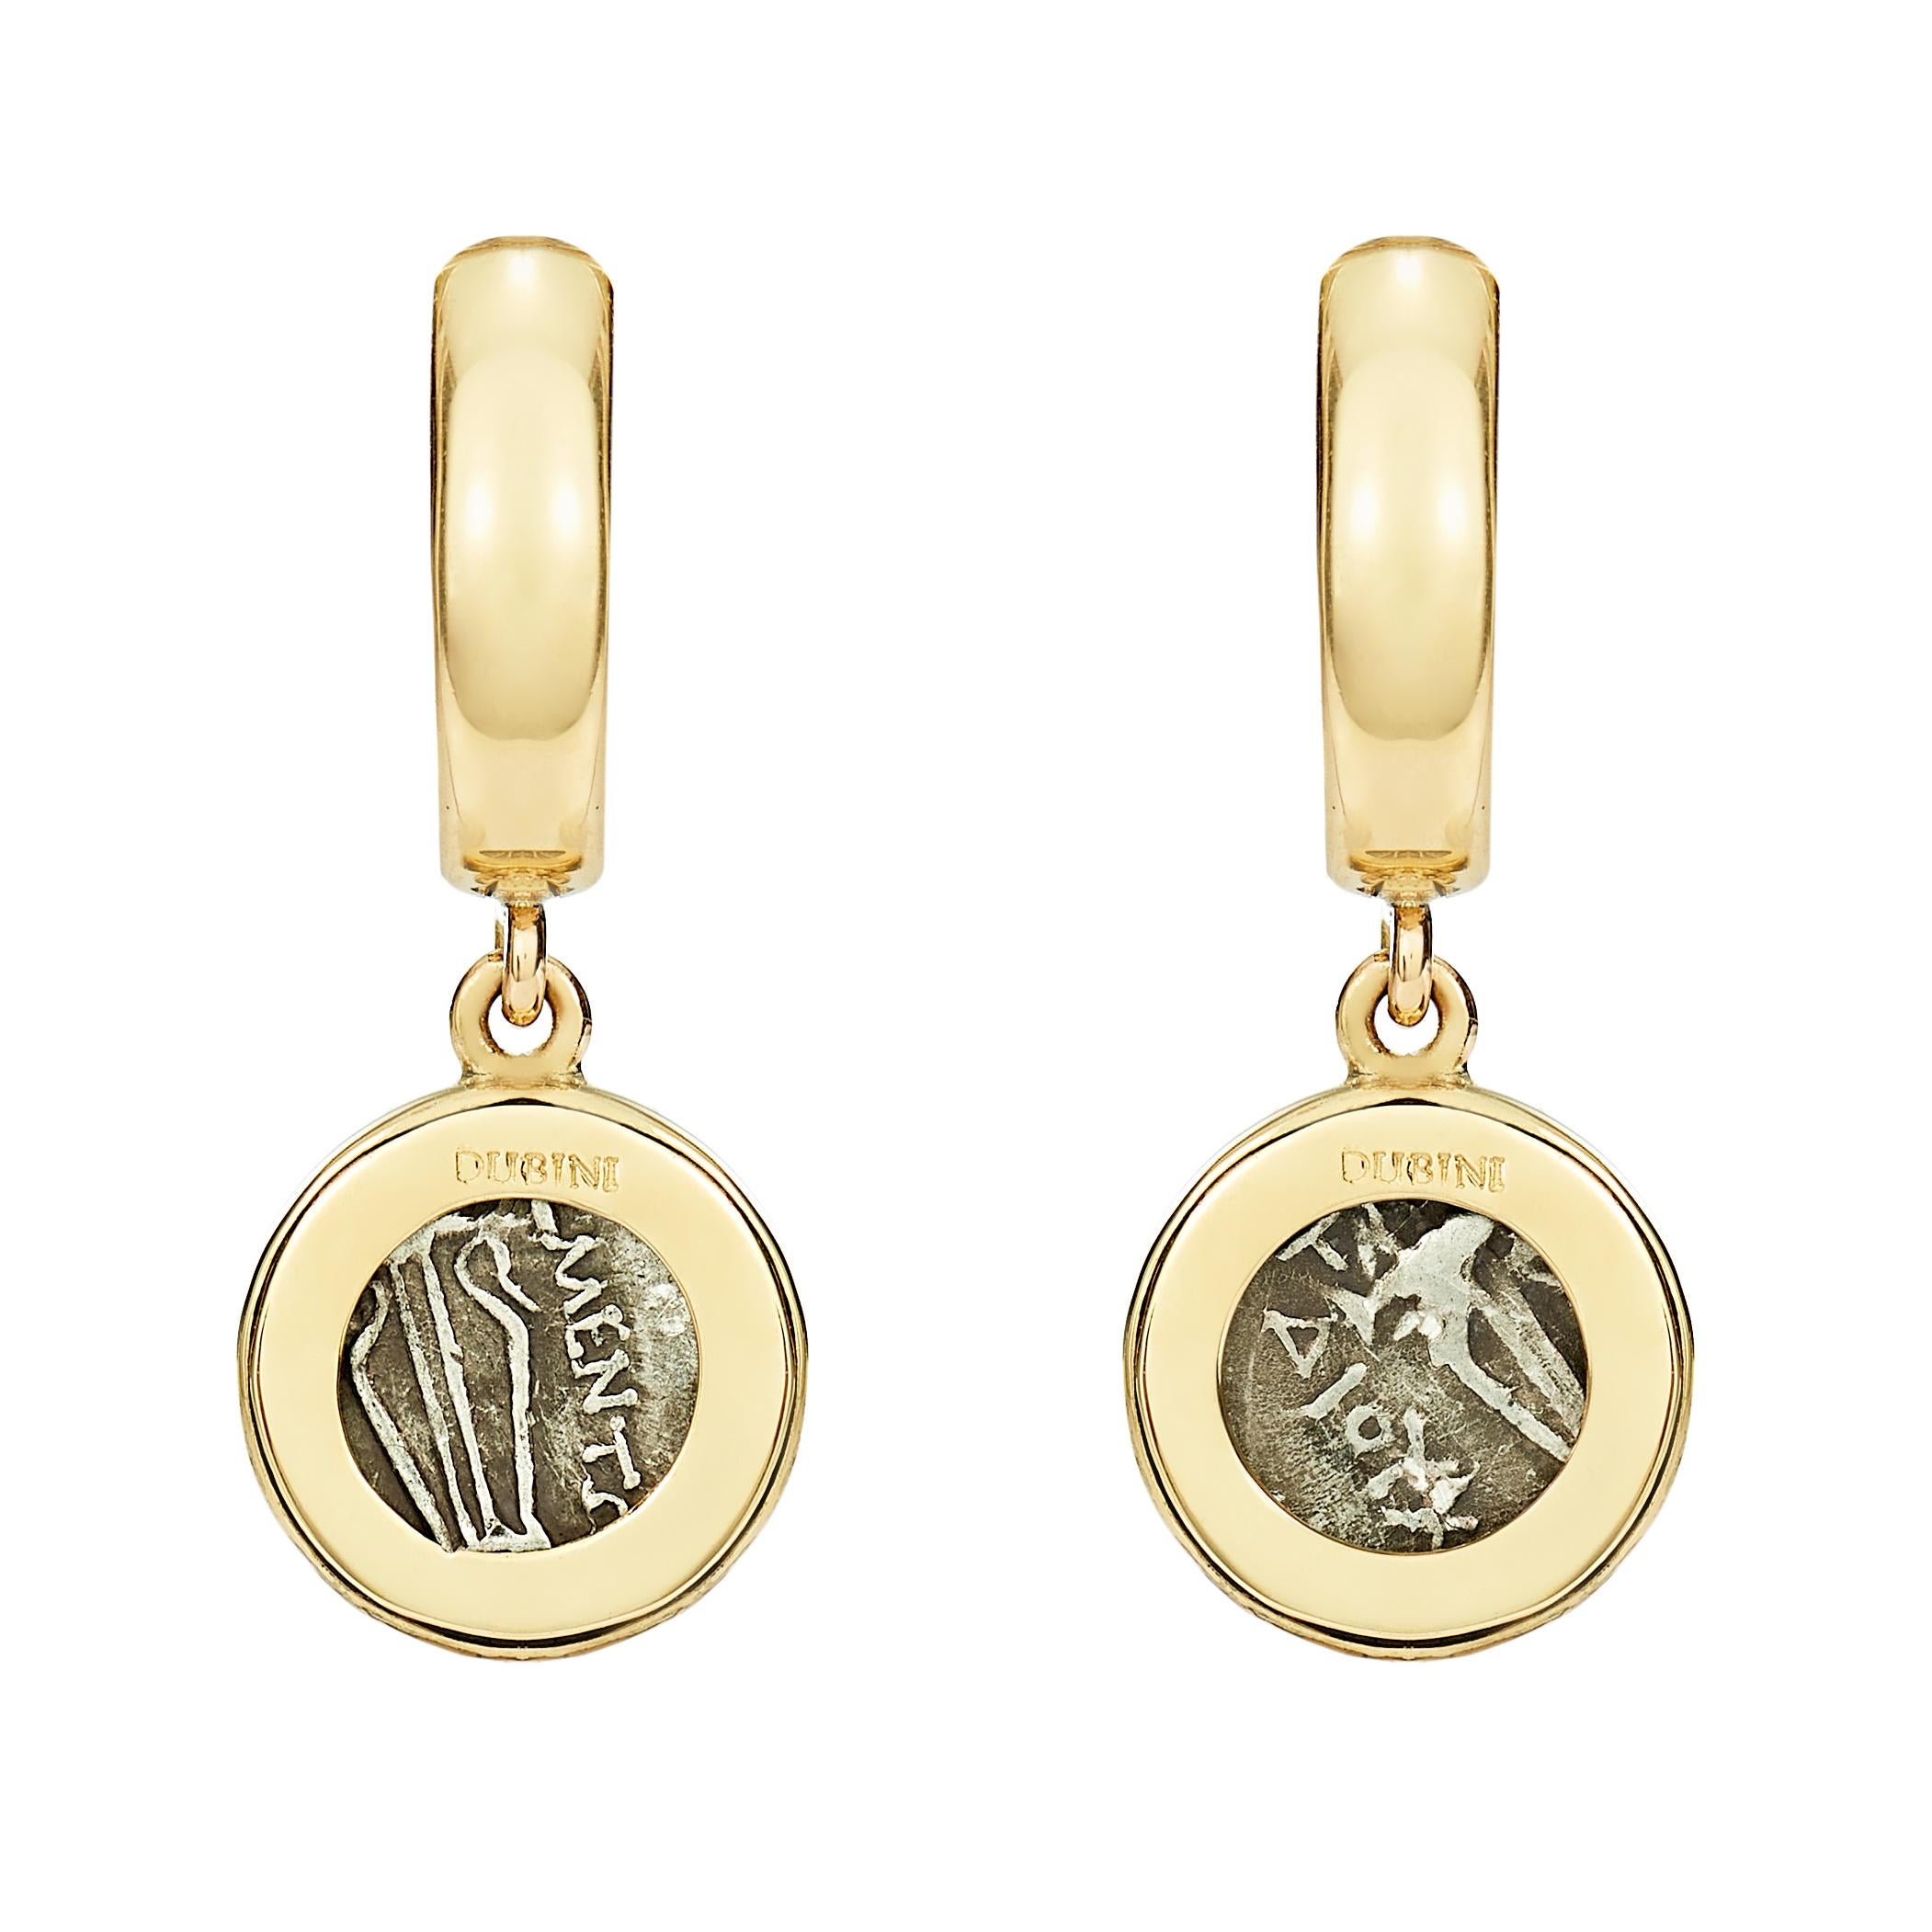 These Dubini coin earrings from the 'Empires' collection feature authentic Ionian coins minted circa 320-294 B.C. set in 18K yellow gold.

HISTORY

The Griffin is a legendary creature with the head and wings of an eagle, and the body of a lion. As